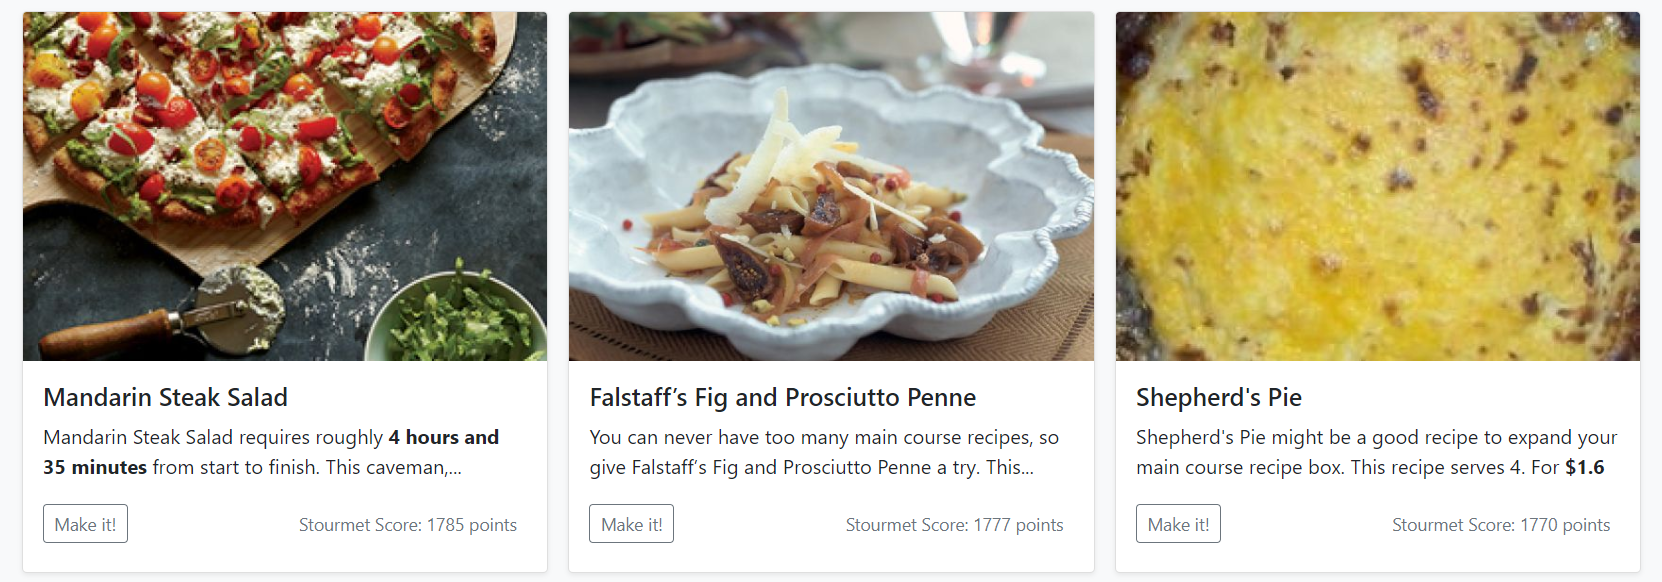 Photo of recipes shown on the Stourmet page